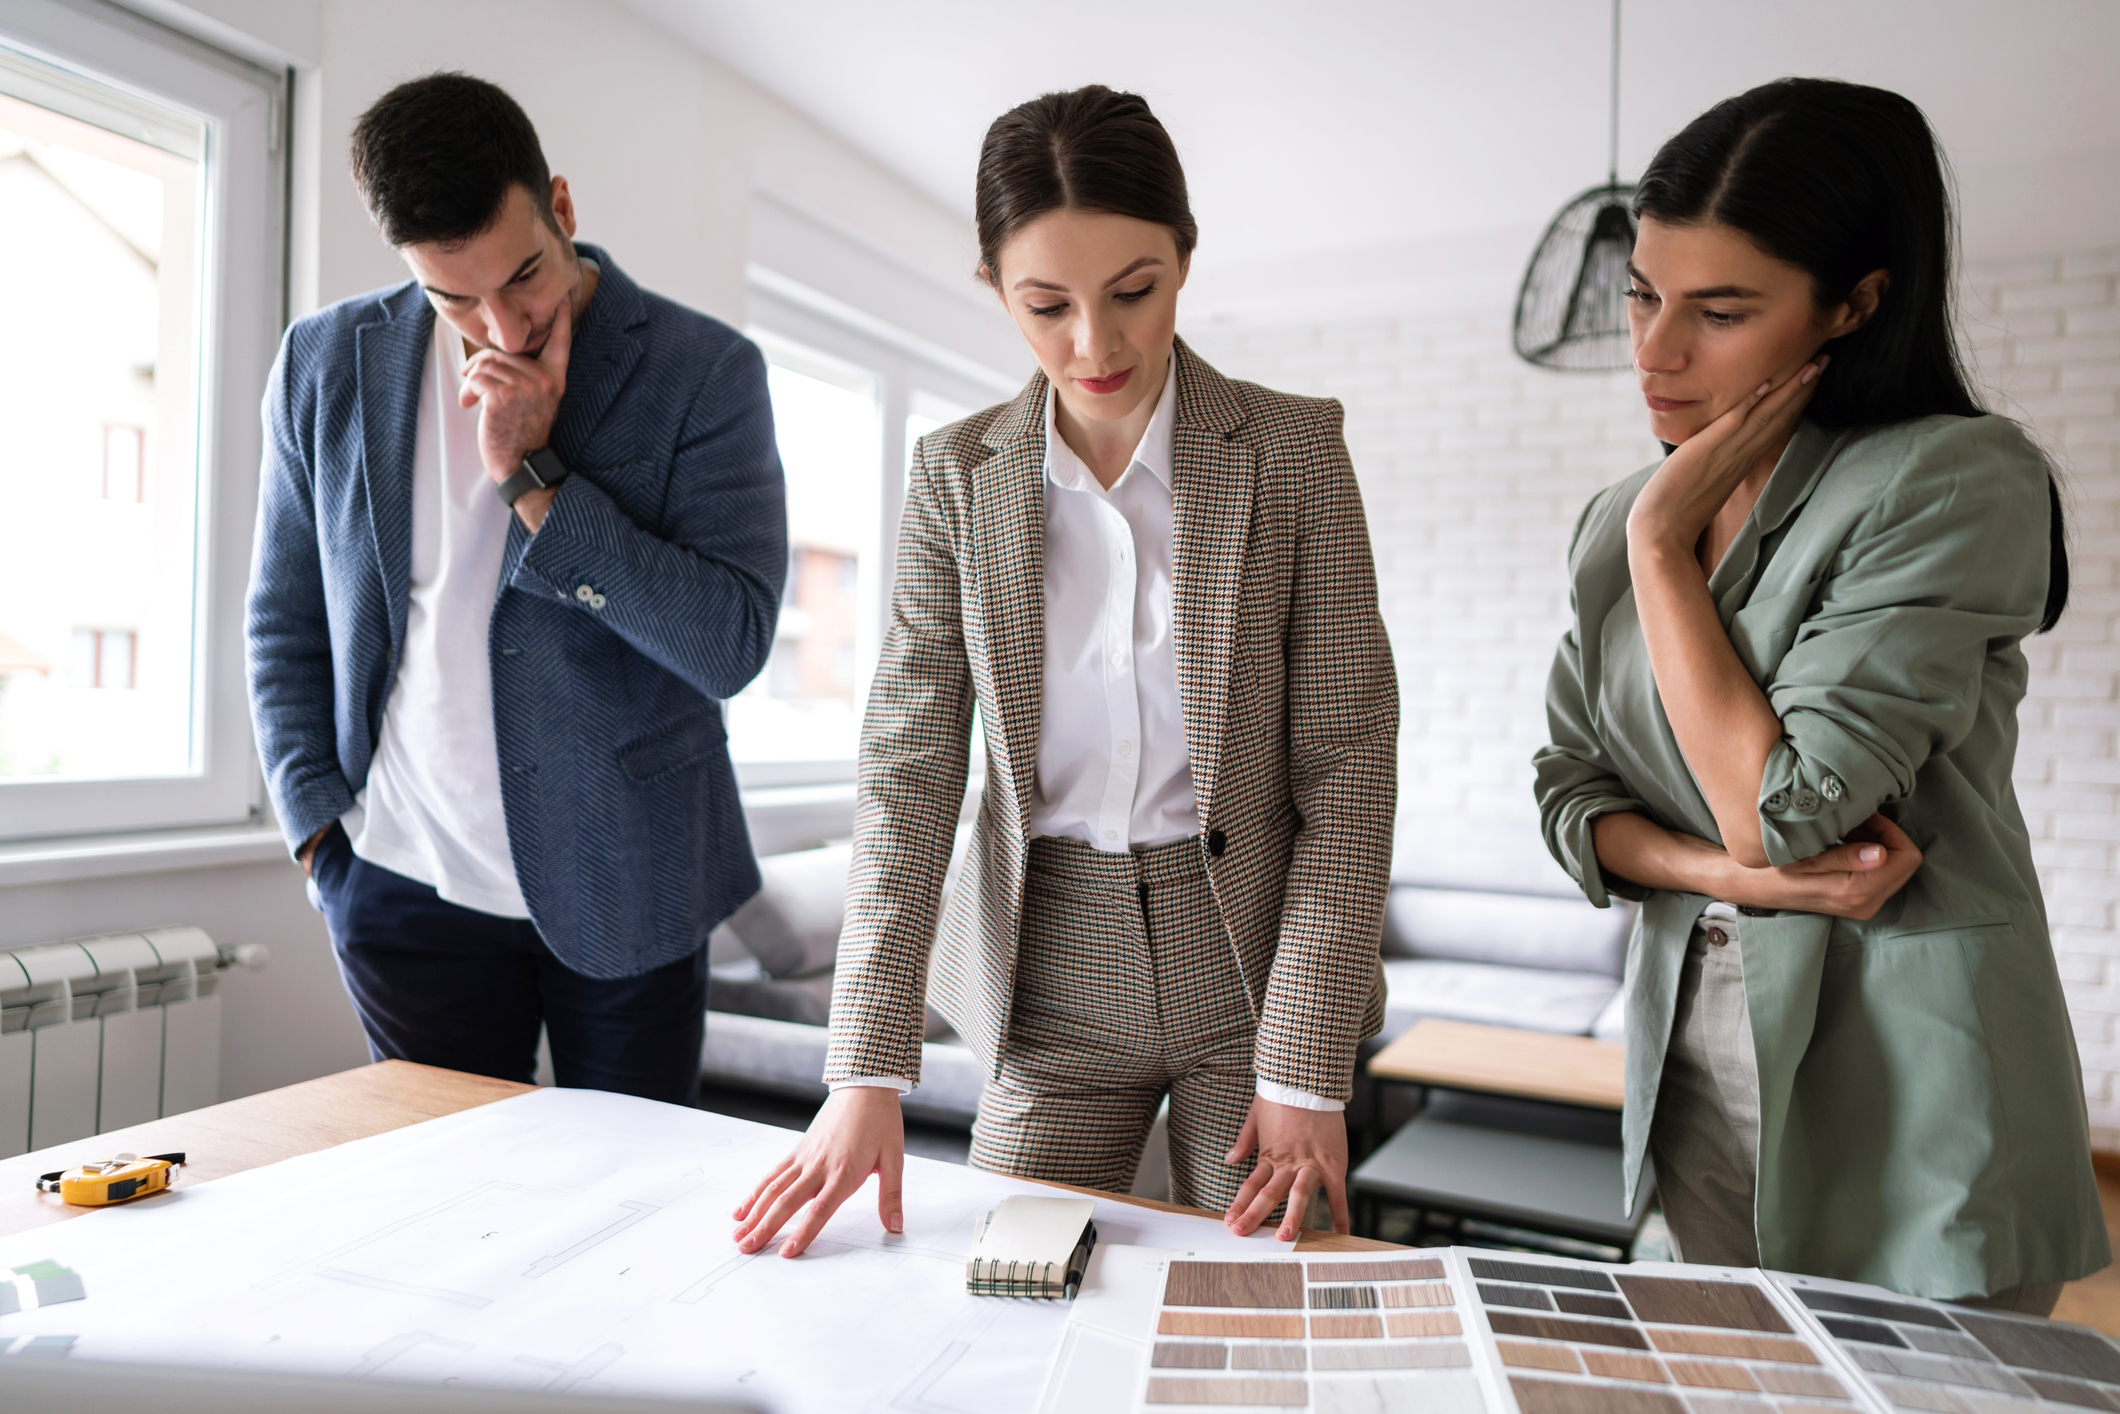 Stock Image of a Real Estate Agent Standing at a Table Looking Down At House Plans and Color Selections While a Man and Woman Stand on Either Side of Her with Their Arms Crossed As If in Disagreement With the Agent